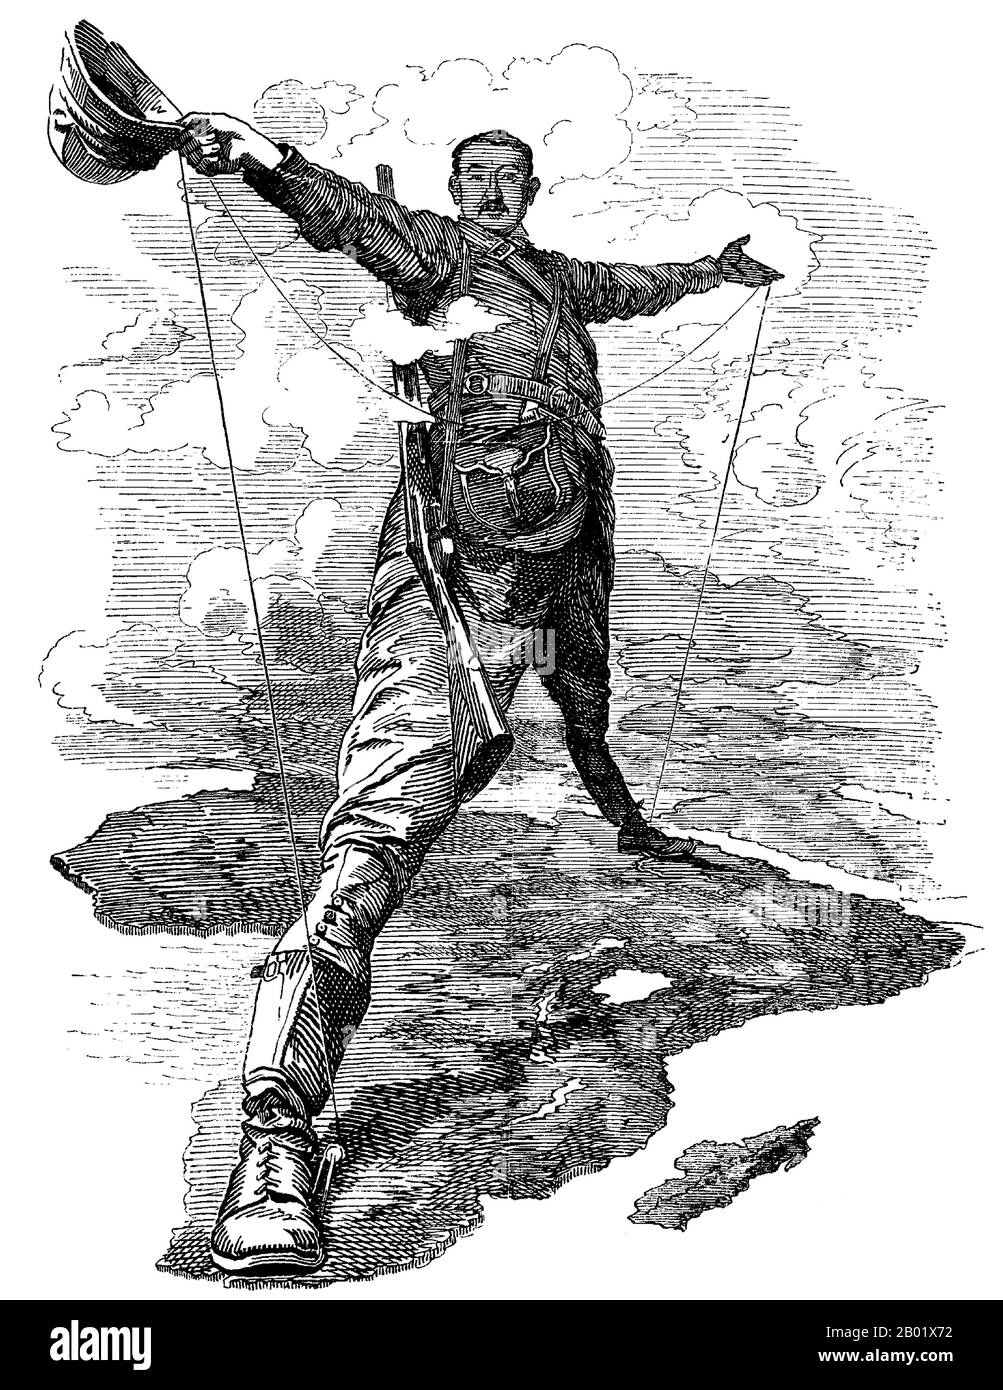 England/South Africa: 'The Rhodes Colossus'. Caricature of Cecil Rhodes (5 July 1853 - 26 March 1902) by Edward Linley Sambourne (1844-1910), published in Punch after Rhodes announced plans for a telegraph line and railroad from Cape Town to Cairo, 10 December 1892.  Cecil John Rhodes was an English-born South African businessman, mining magnate and politician. He was the founder of the diamond company De Beers, which today markets 40% of the world's rough diamonds and at one time marketed 90%.  An ardent believer in British colonialism, he was the founder of the state of Rhodesia. Stock Photo